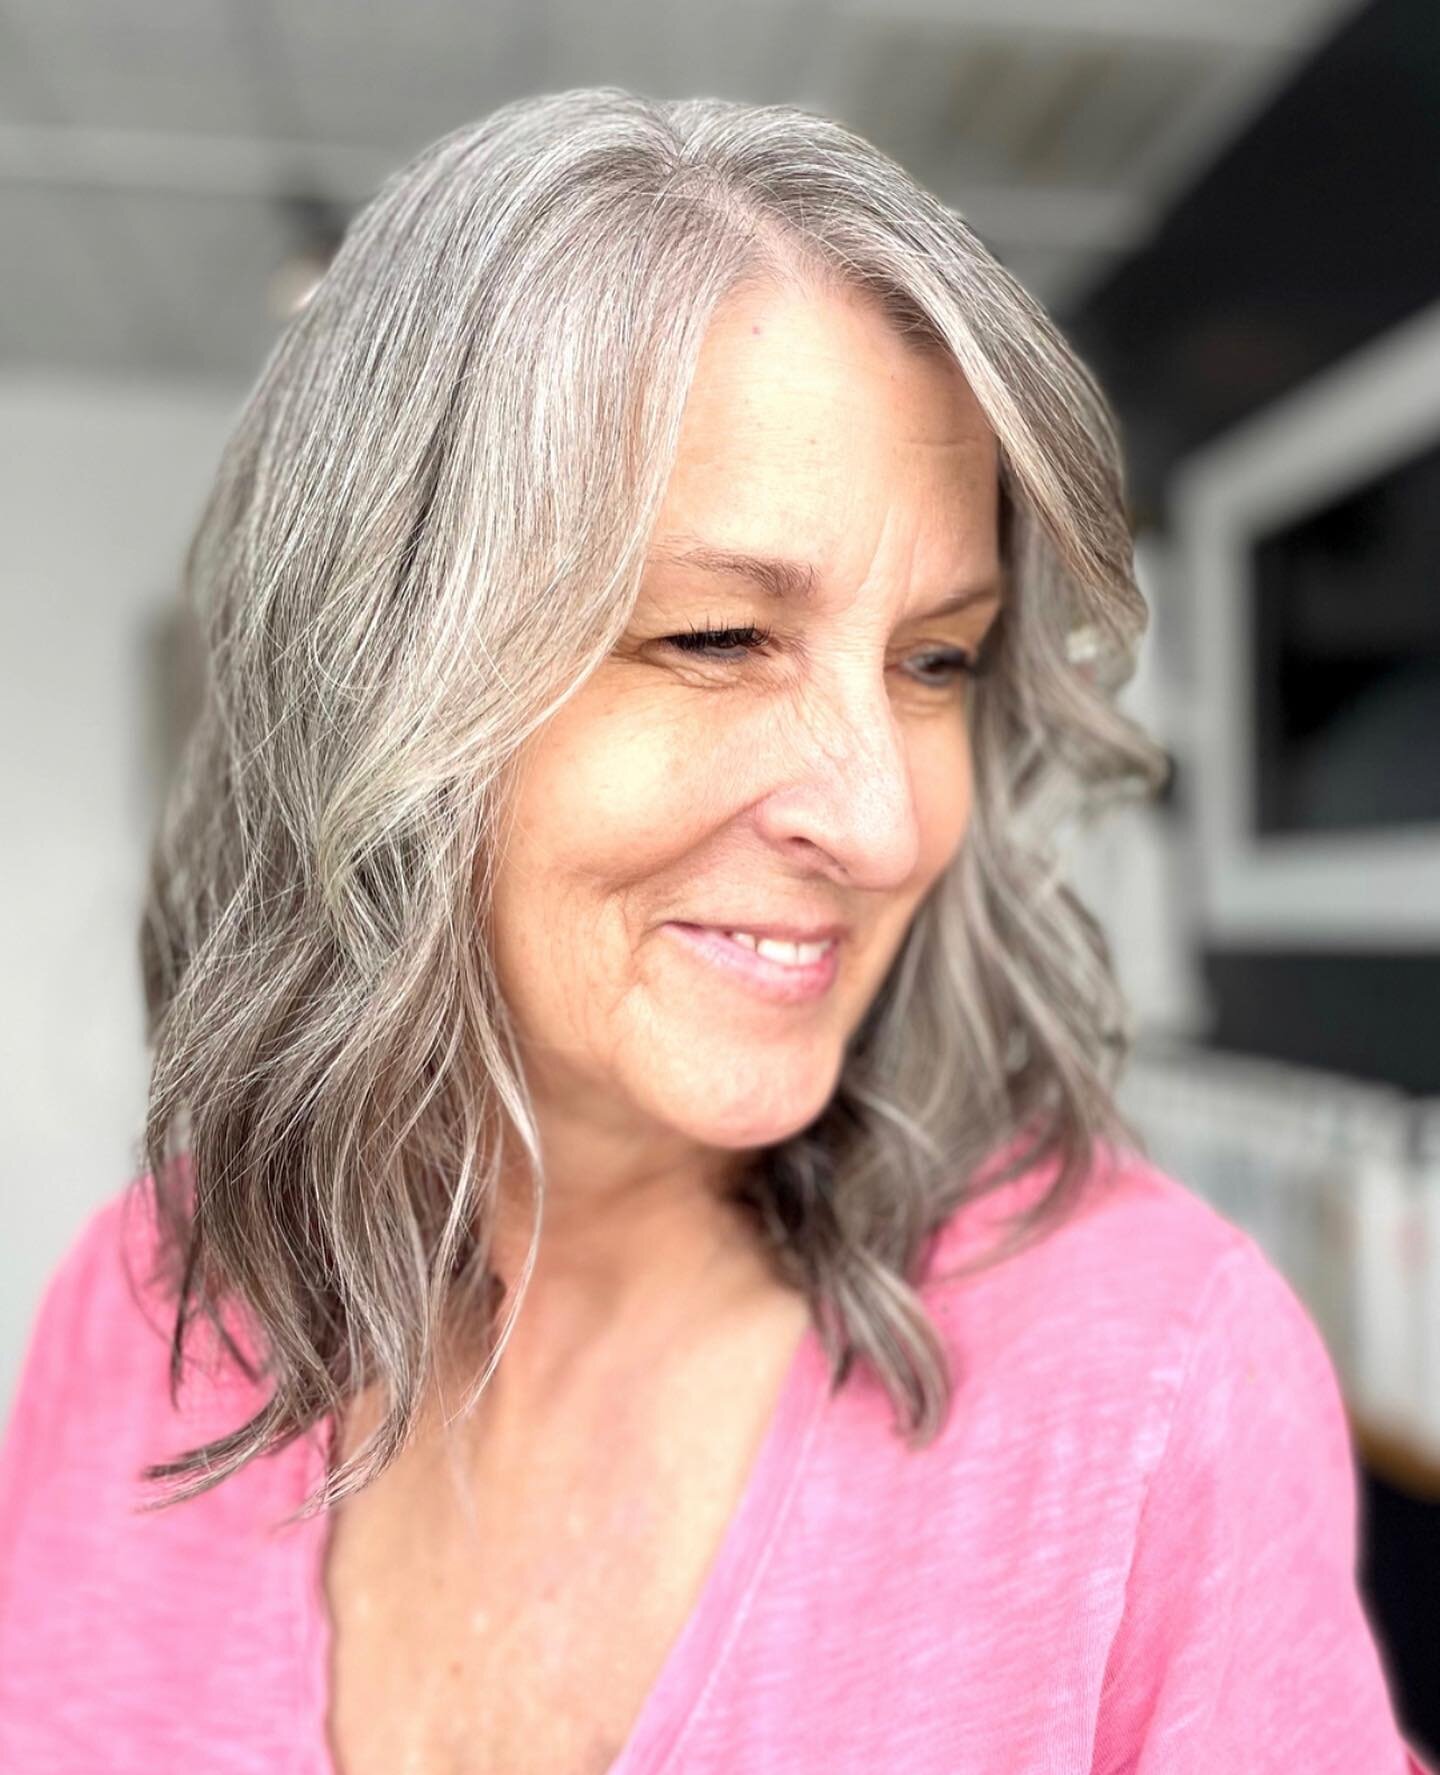 Loving this natural gray with a perfect style done by @strandappeal . 💕
.
#wedding #Earthlybeauty #earthlybeautybar #cda #cdaidaho #idaho #idahome #idahostylist #hair #salon #luxury #luxurysalon #cdasalon #downtown #downtowncda #updo #style